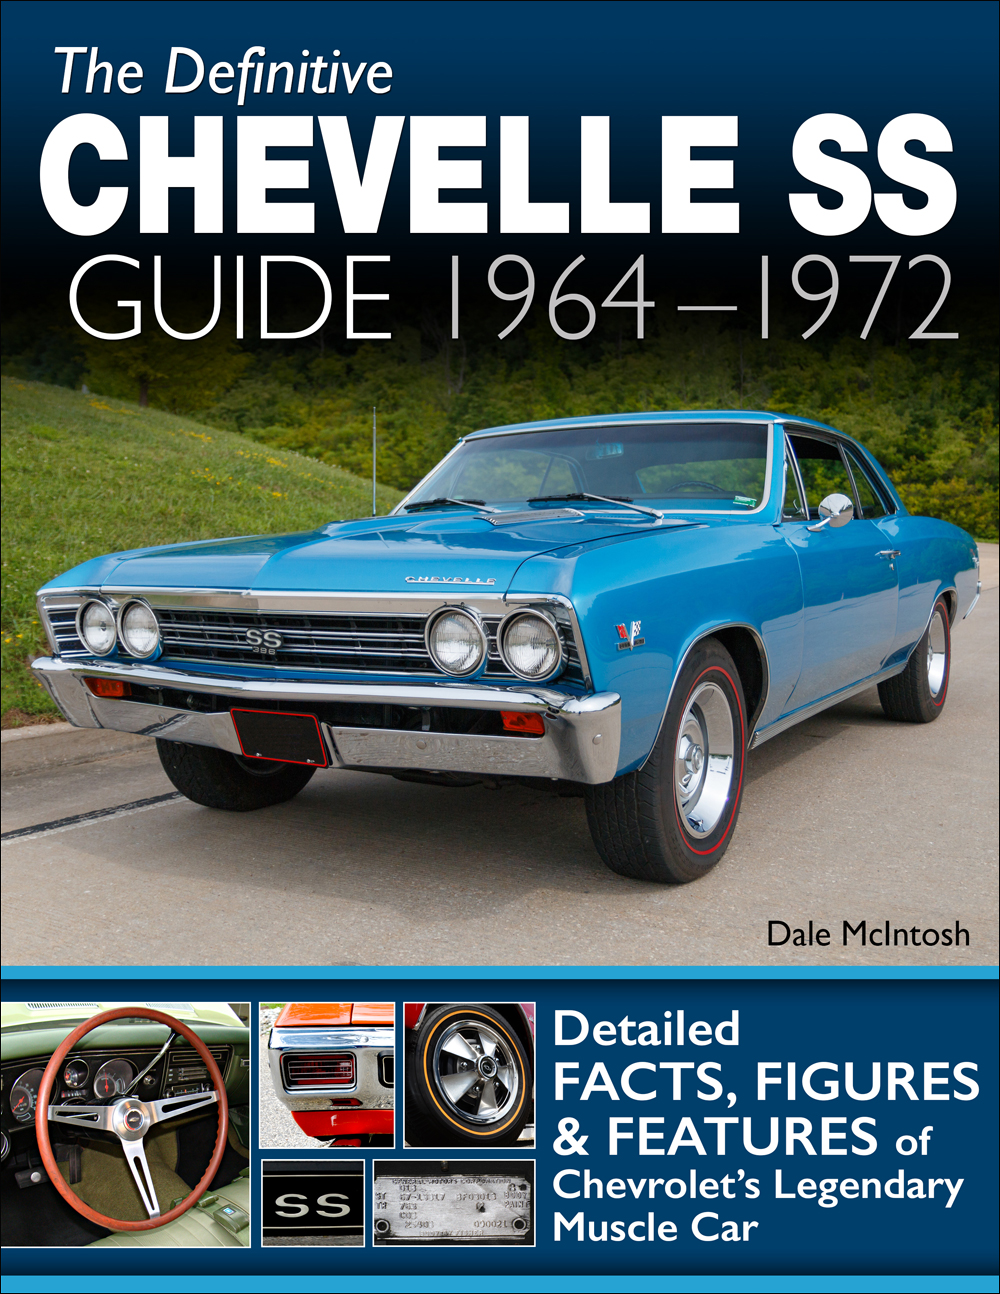 The Definitive Chevelle SS Guide 1964-1972: Facts, Figures, and Features